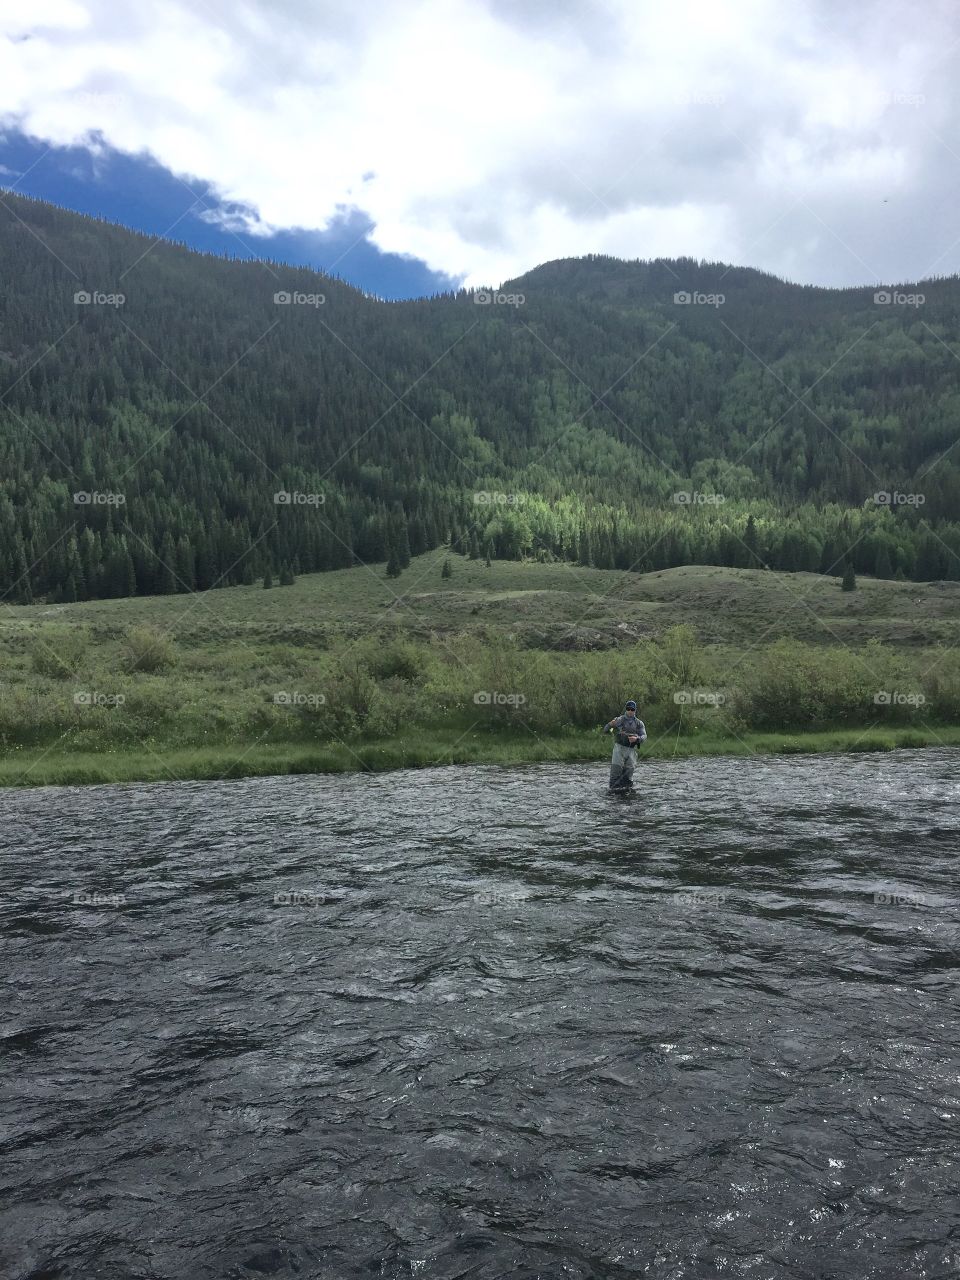 Fishing in the mountains